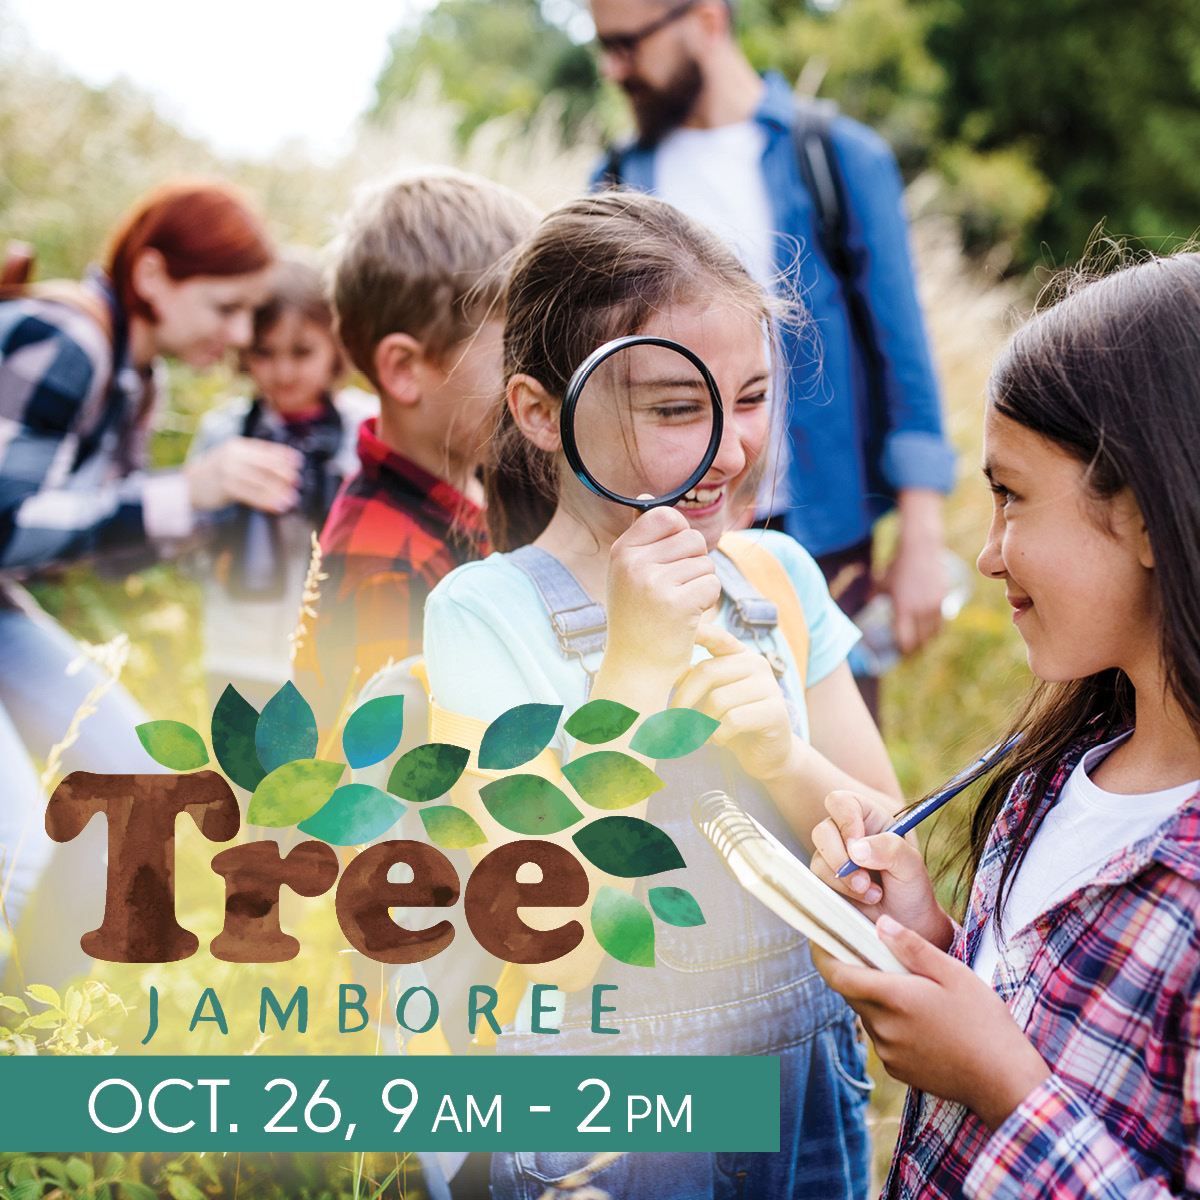 Girl looking through magnifying glass to advertise the Tree Jamboree